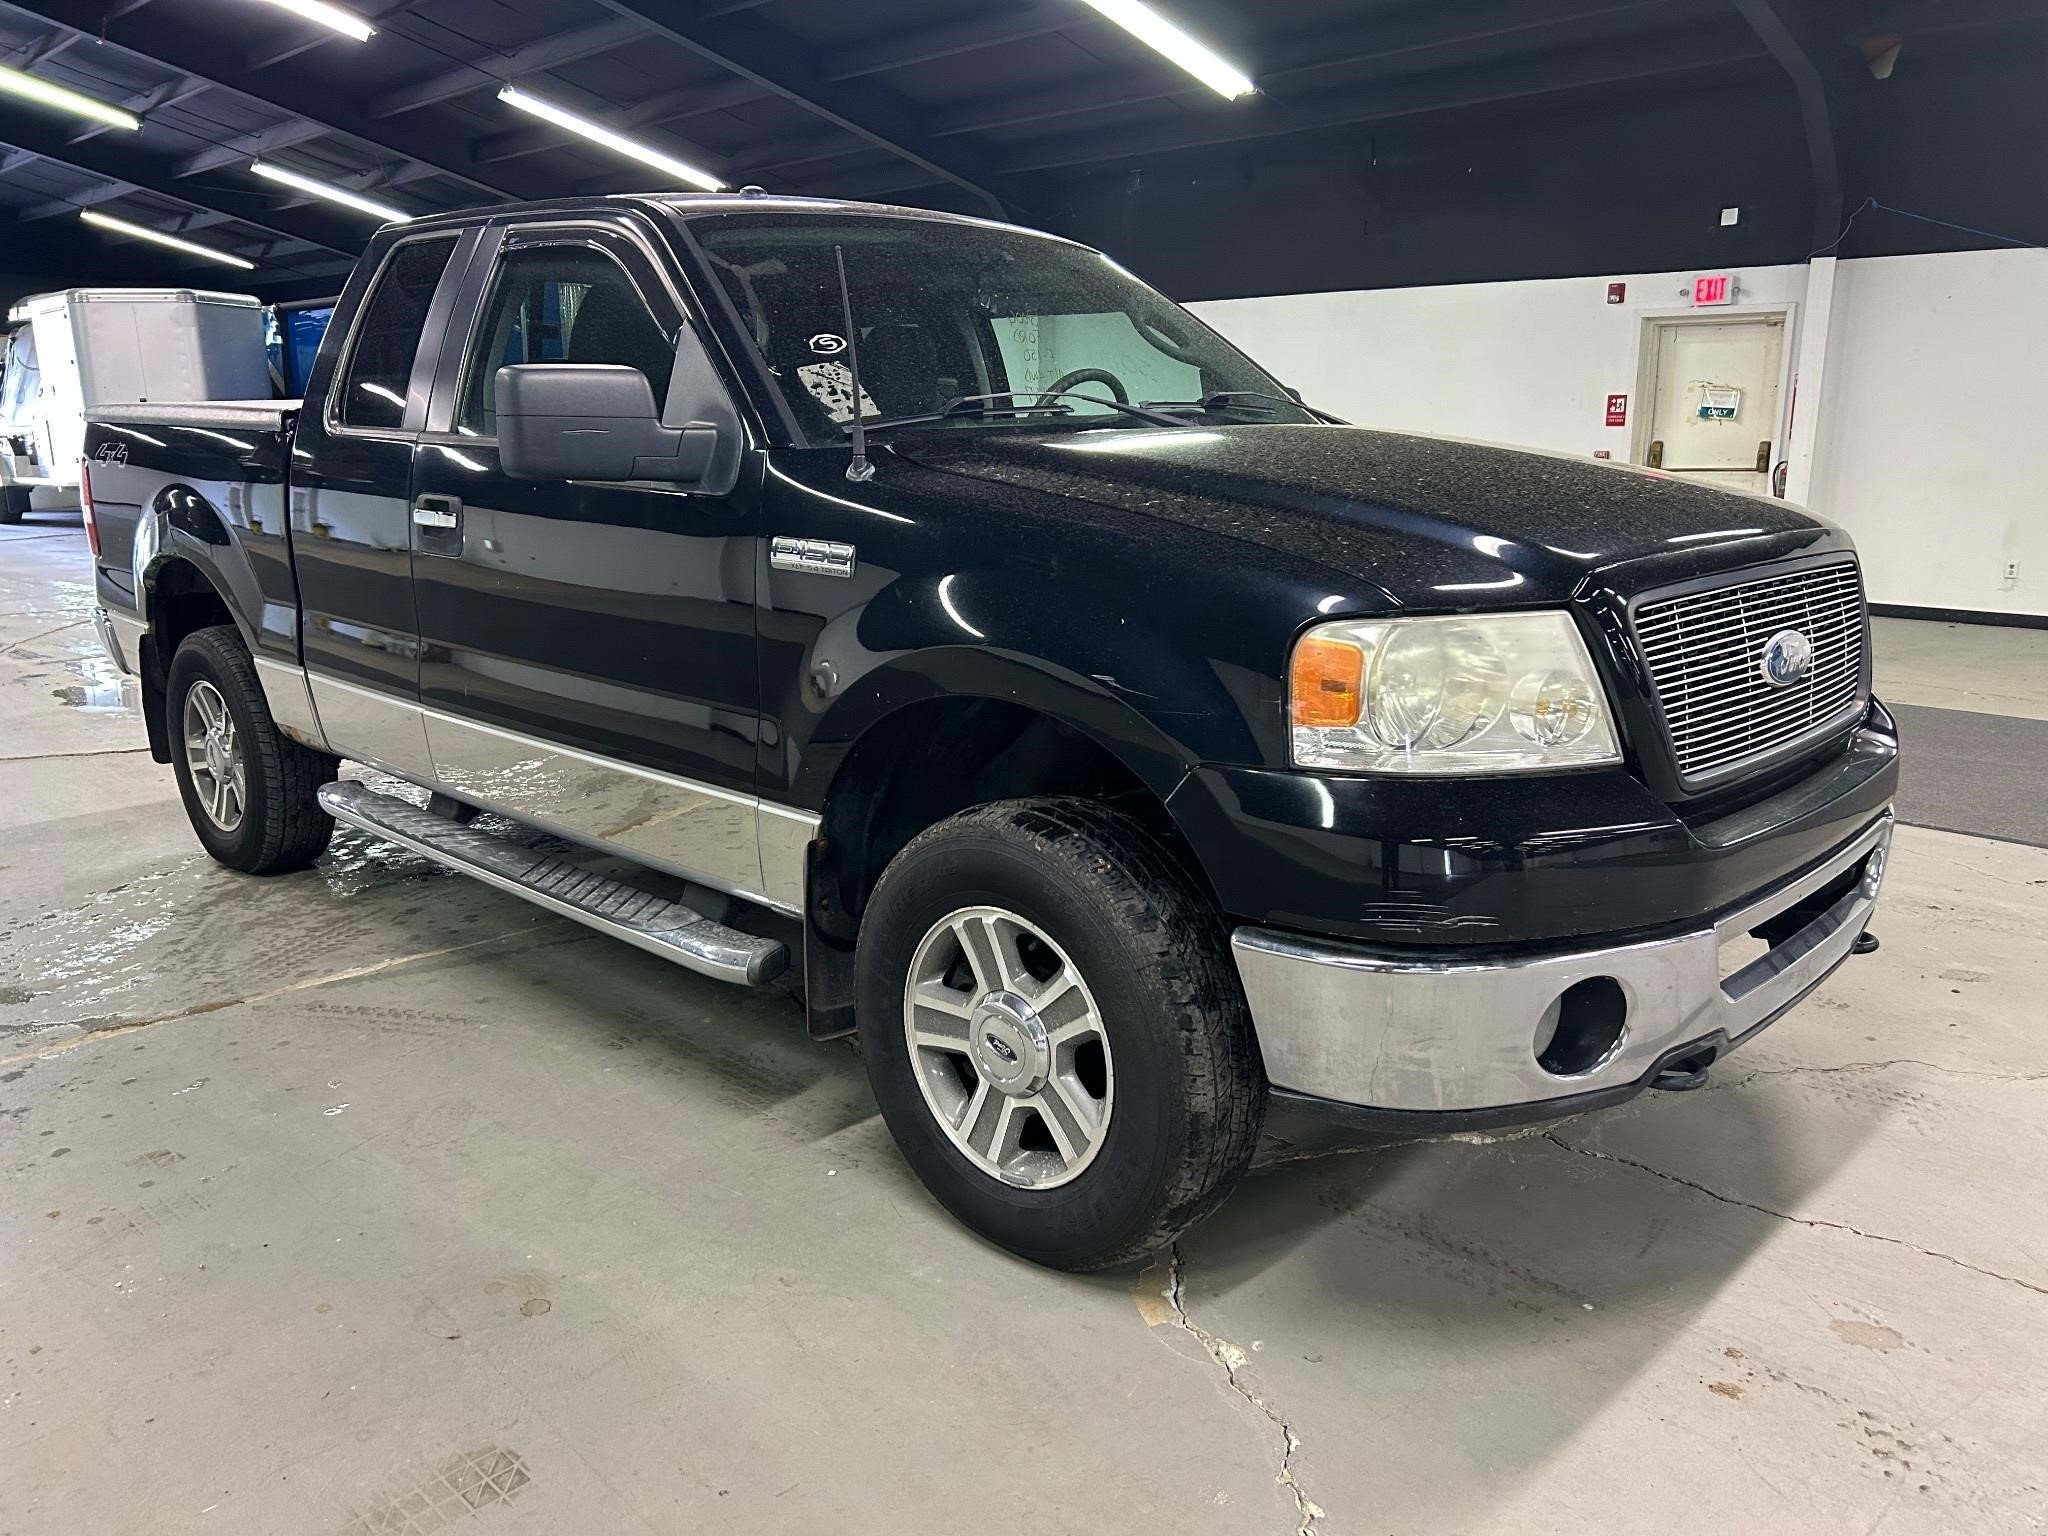 2006 Ford F150 Truck- Titled